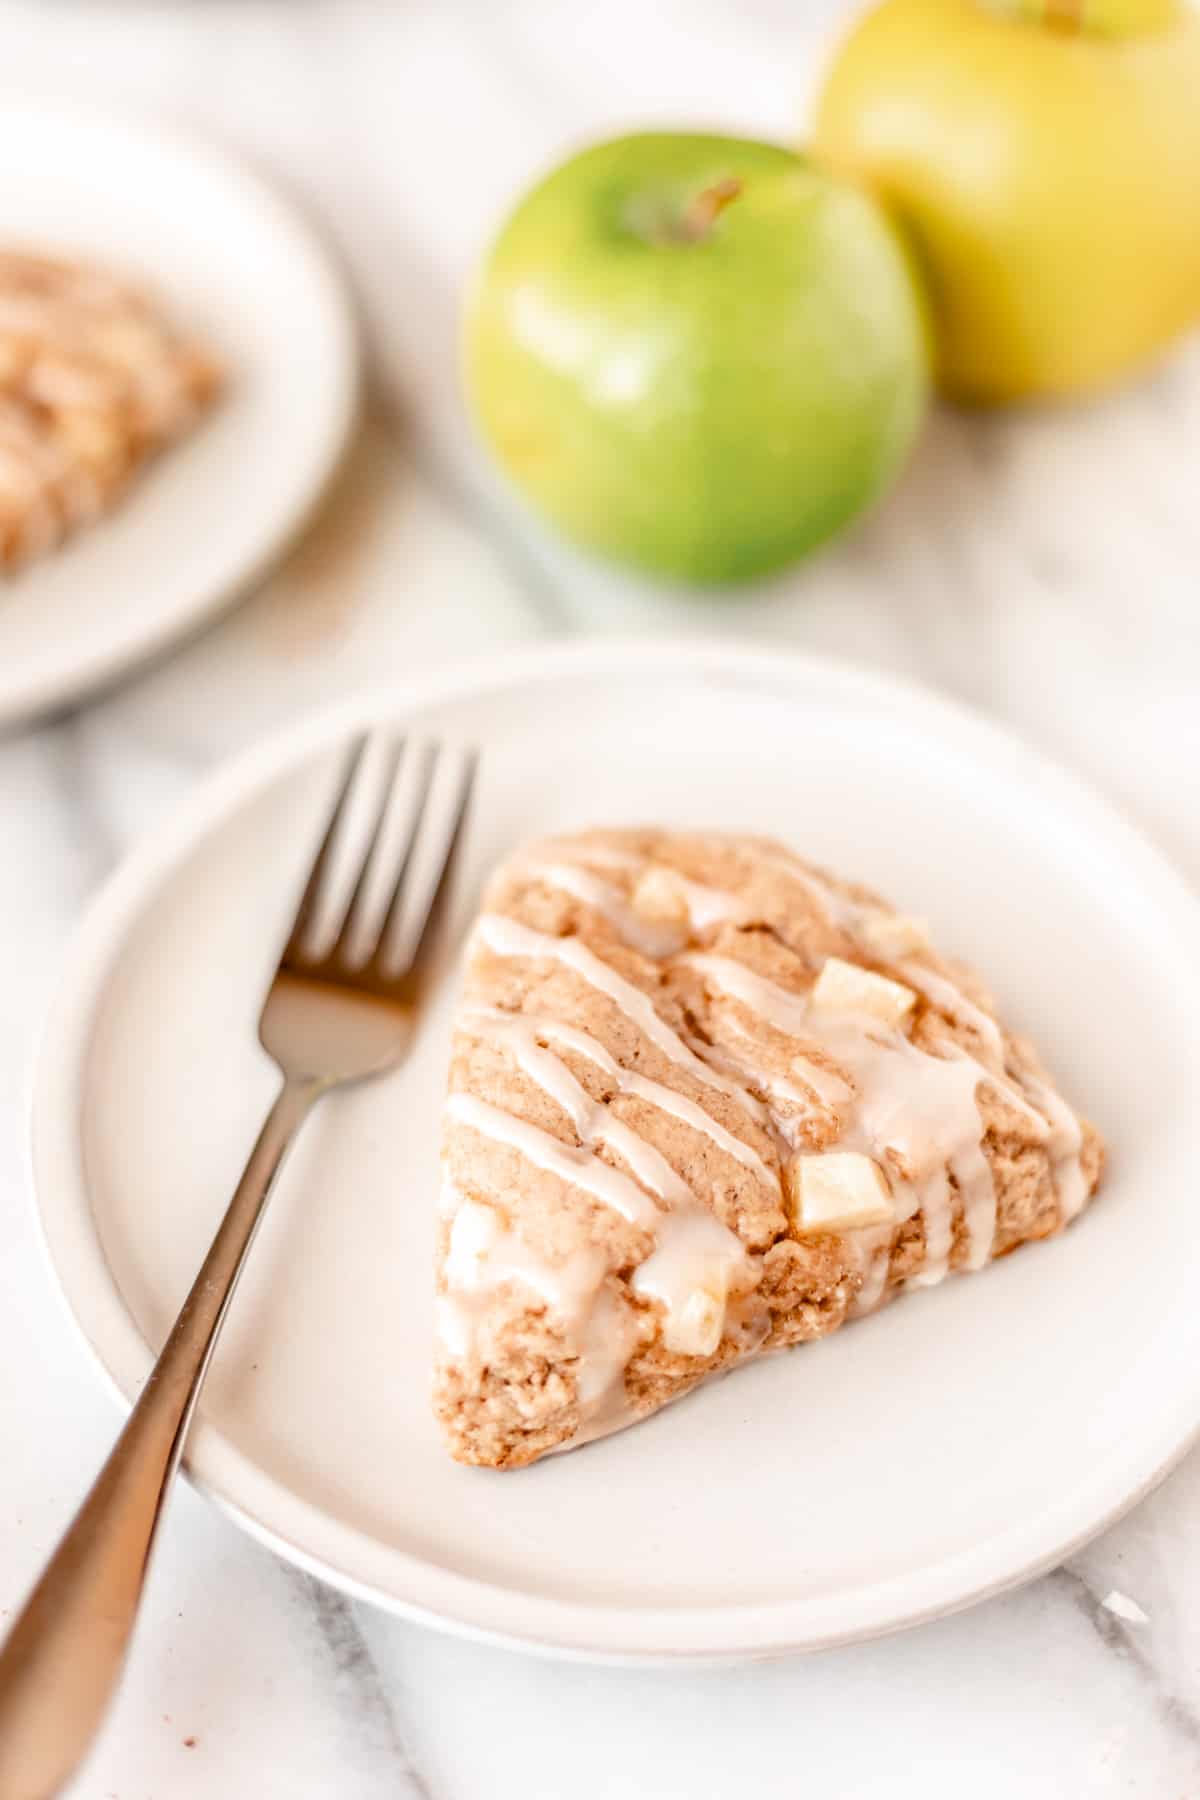 An apple cinnamon scone on a white plate with a fork next to it with a second plate and apples in the background.